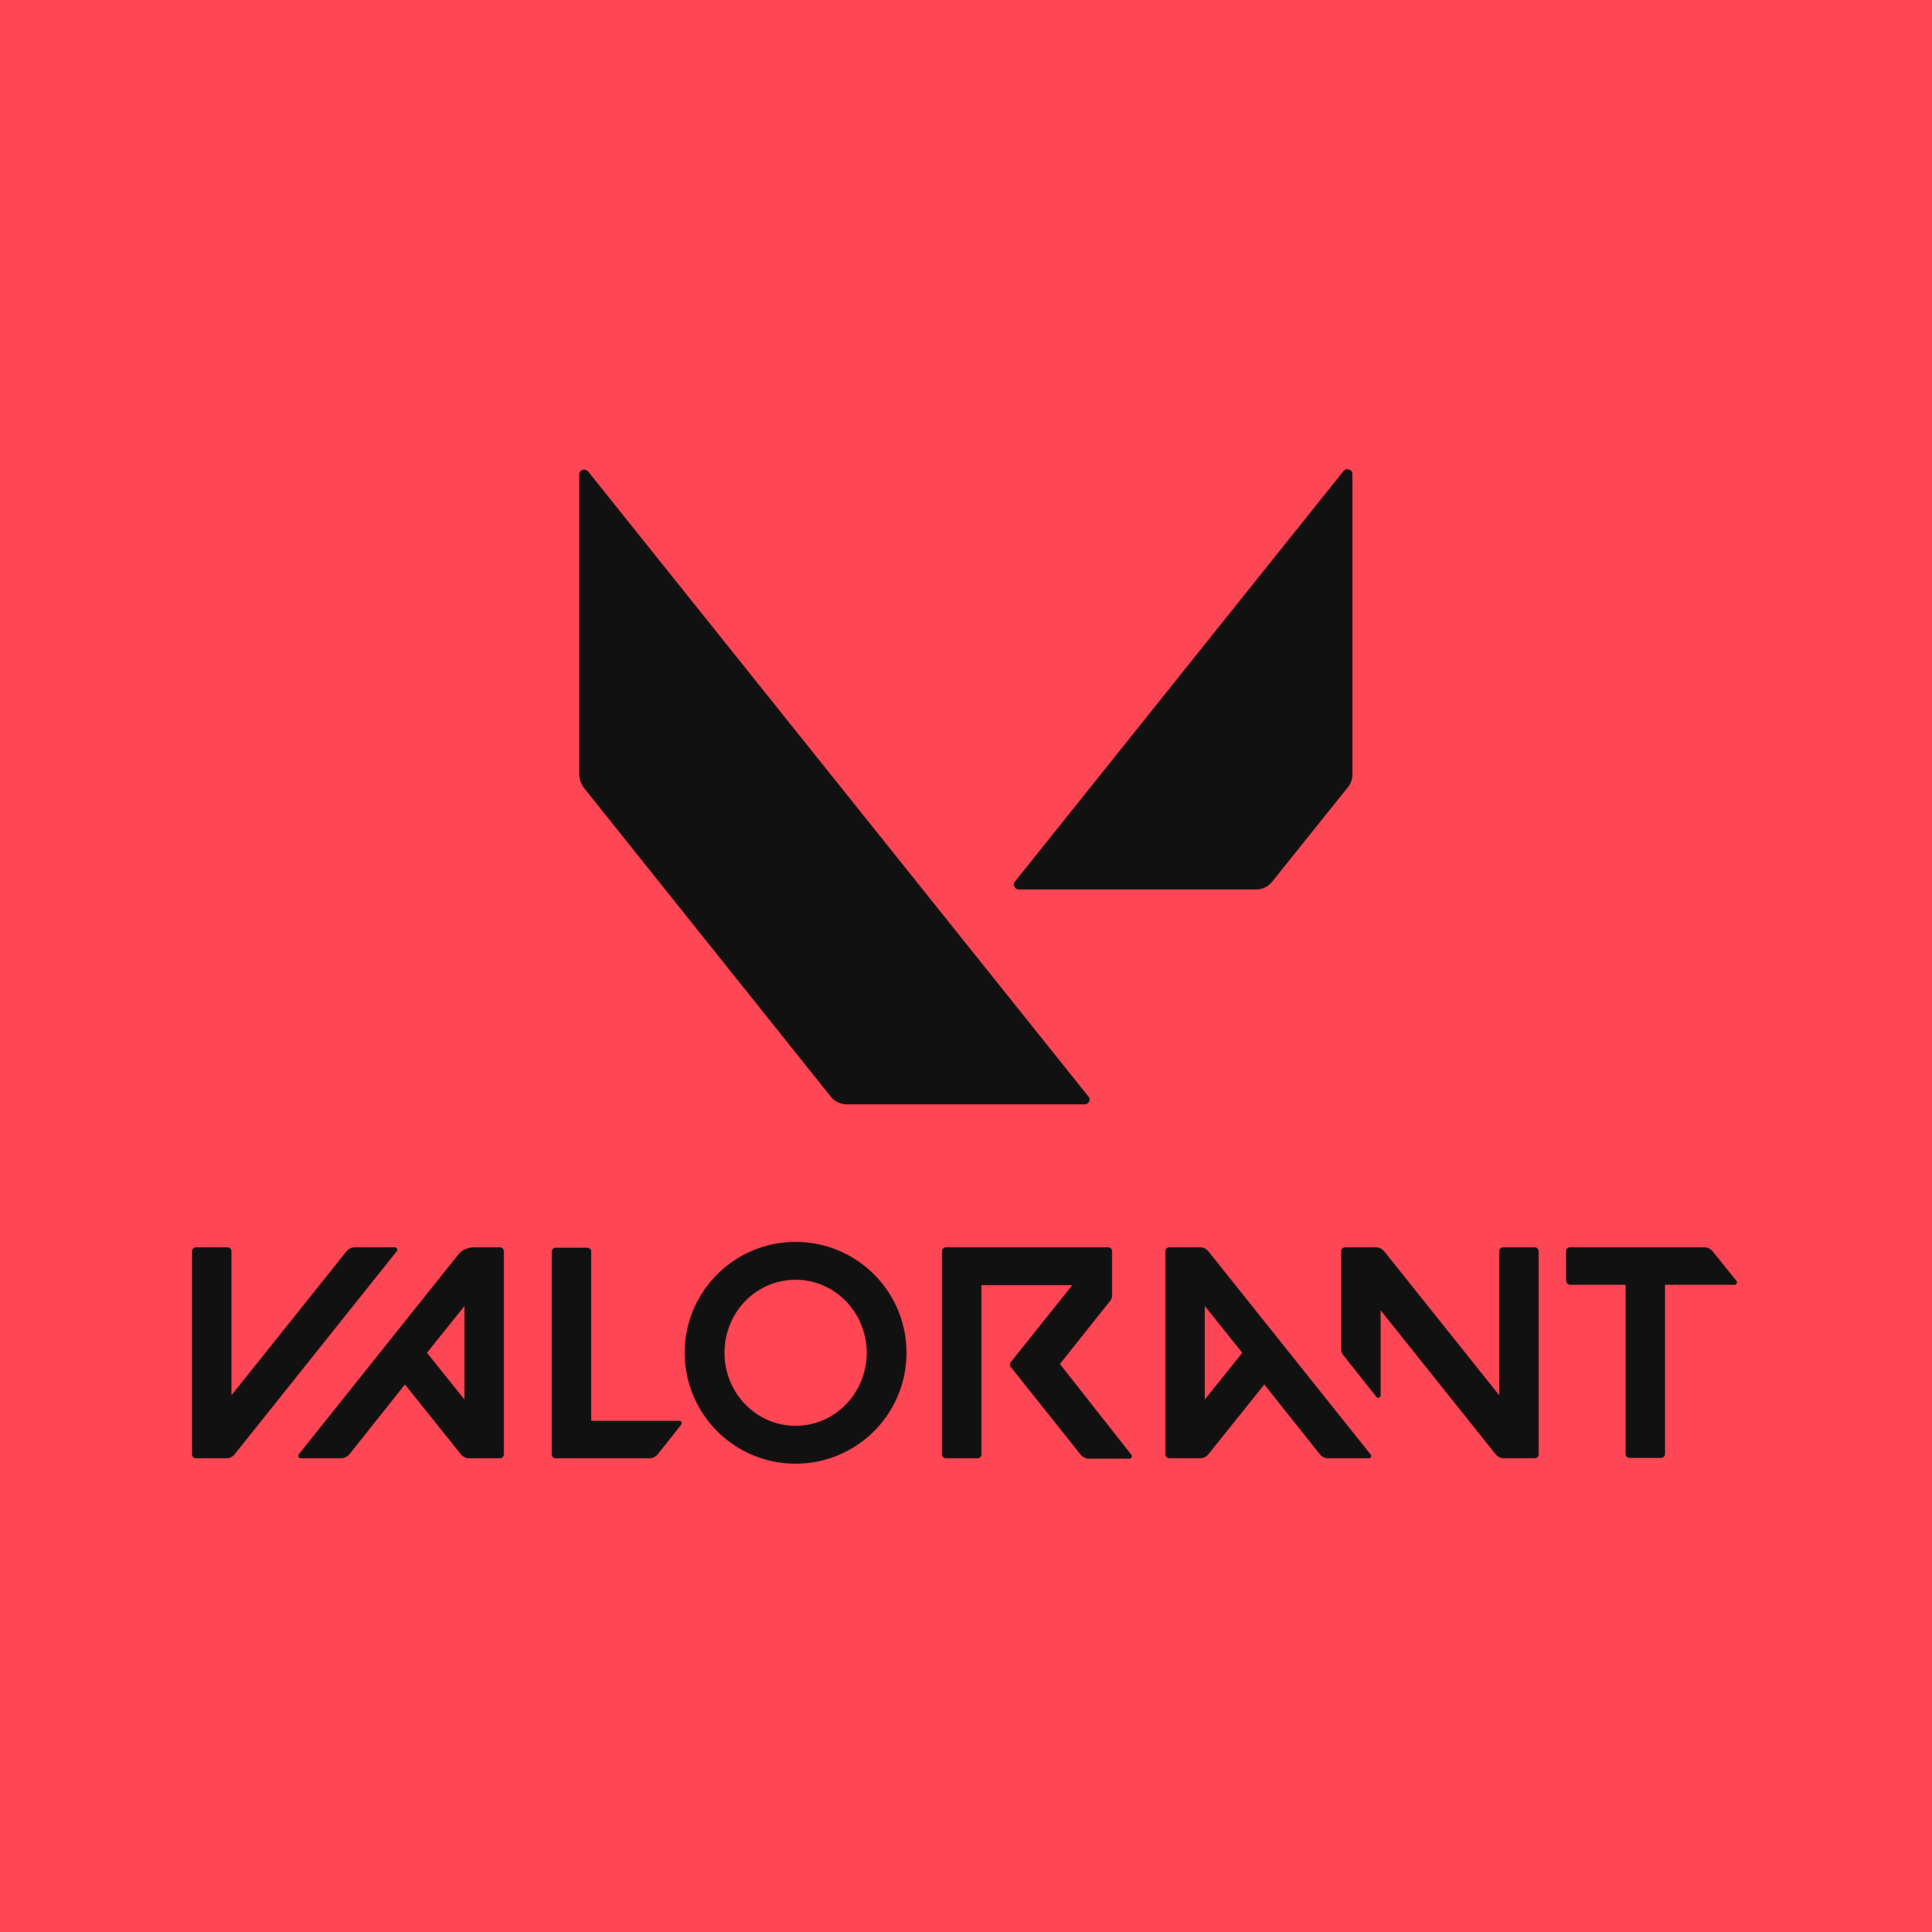 valorant total download size